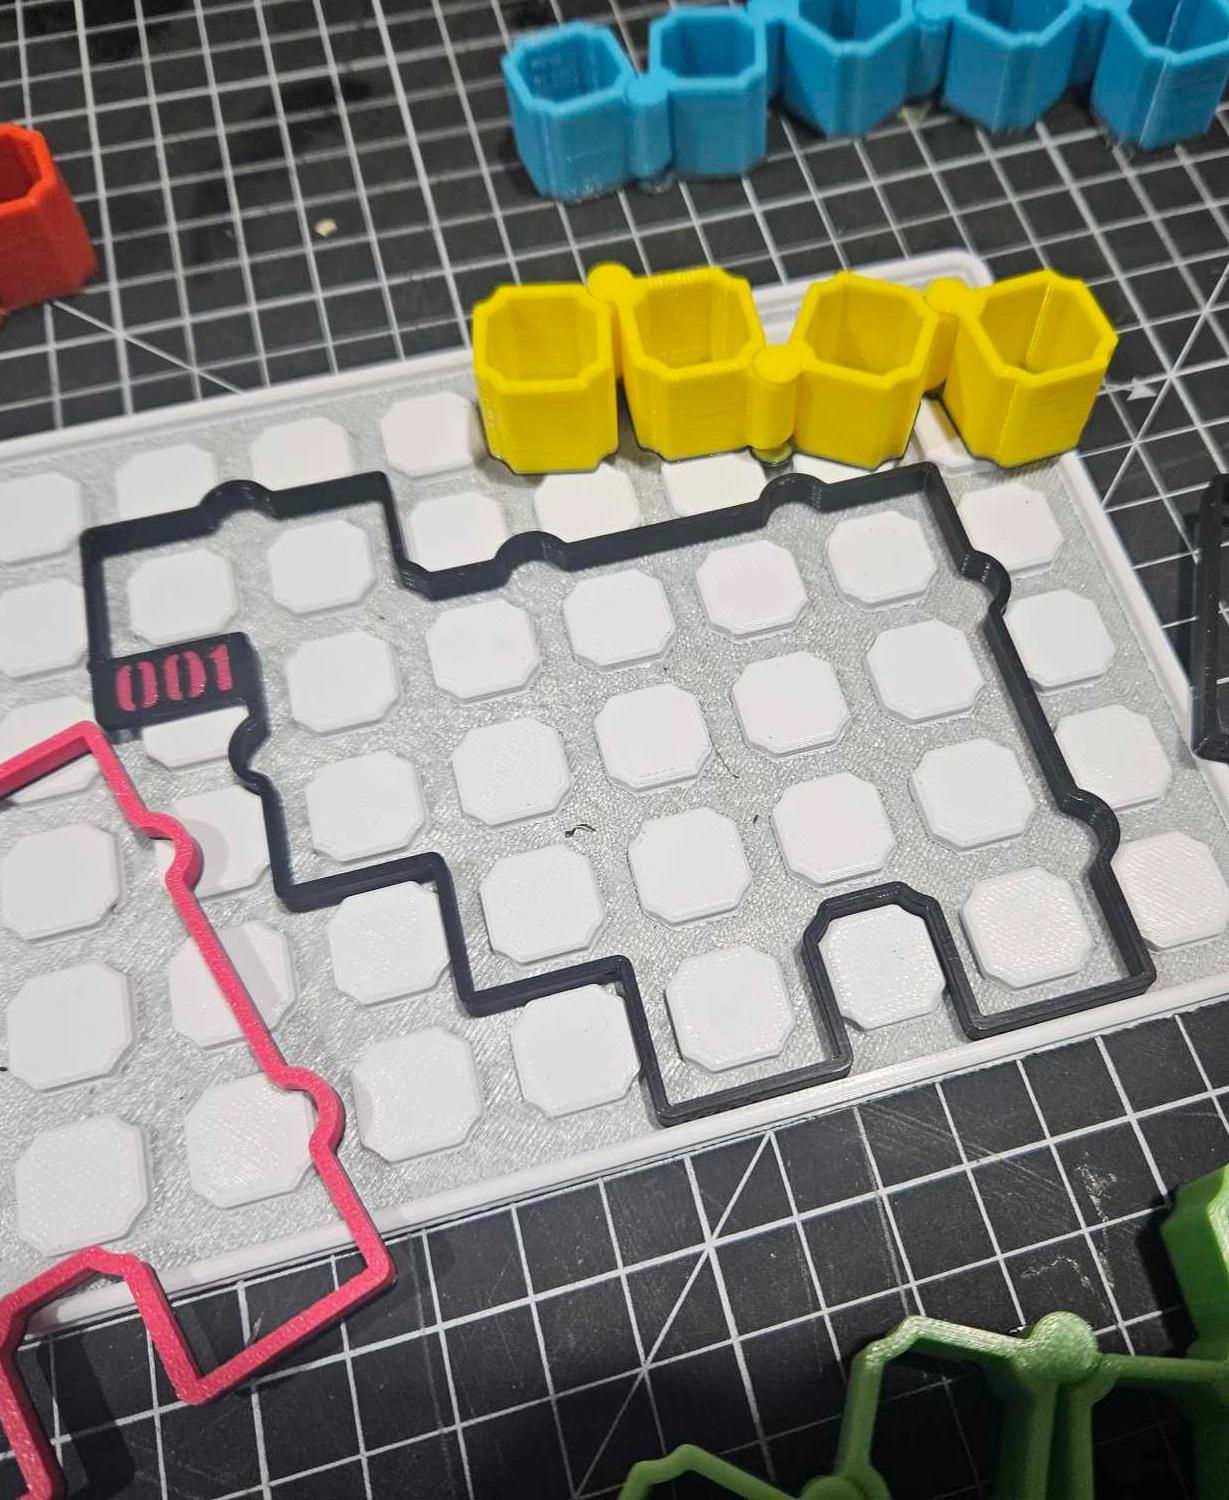 SKEWBITS Puzzle Game for 3D Printing - Slight modification to make the numbers easier to see. Now to reprint them all. - 3d model